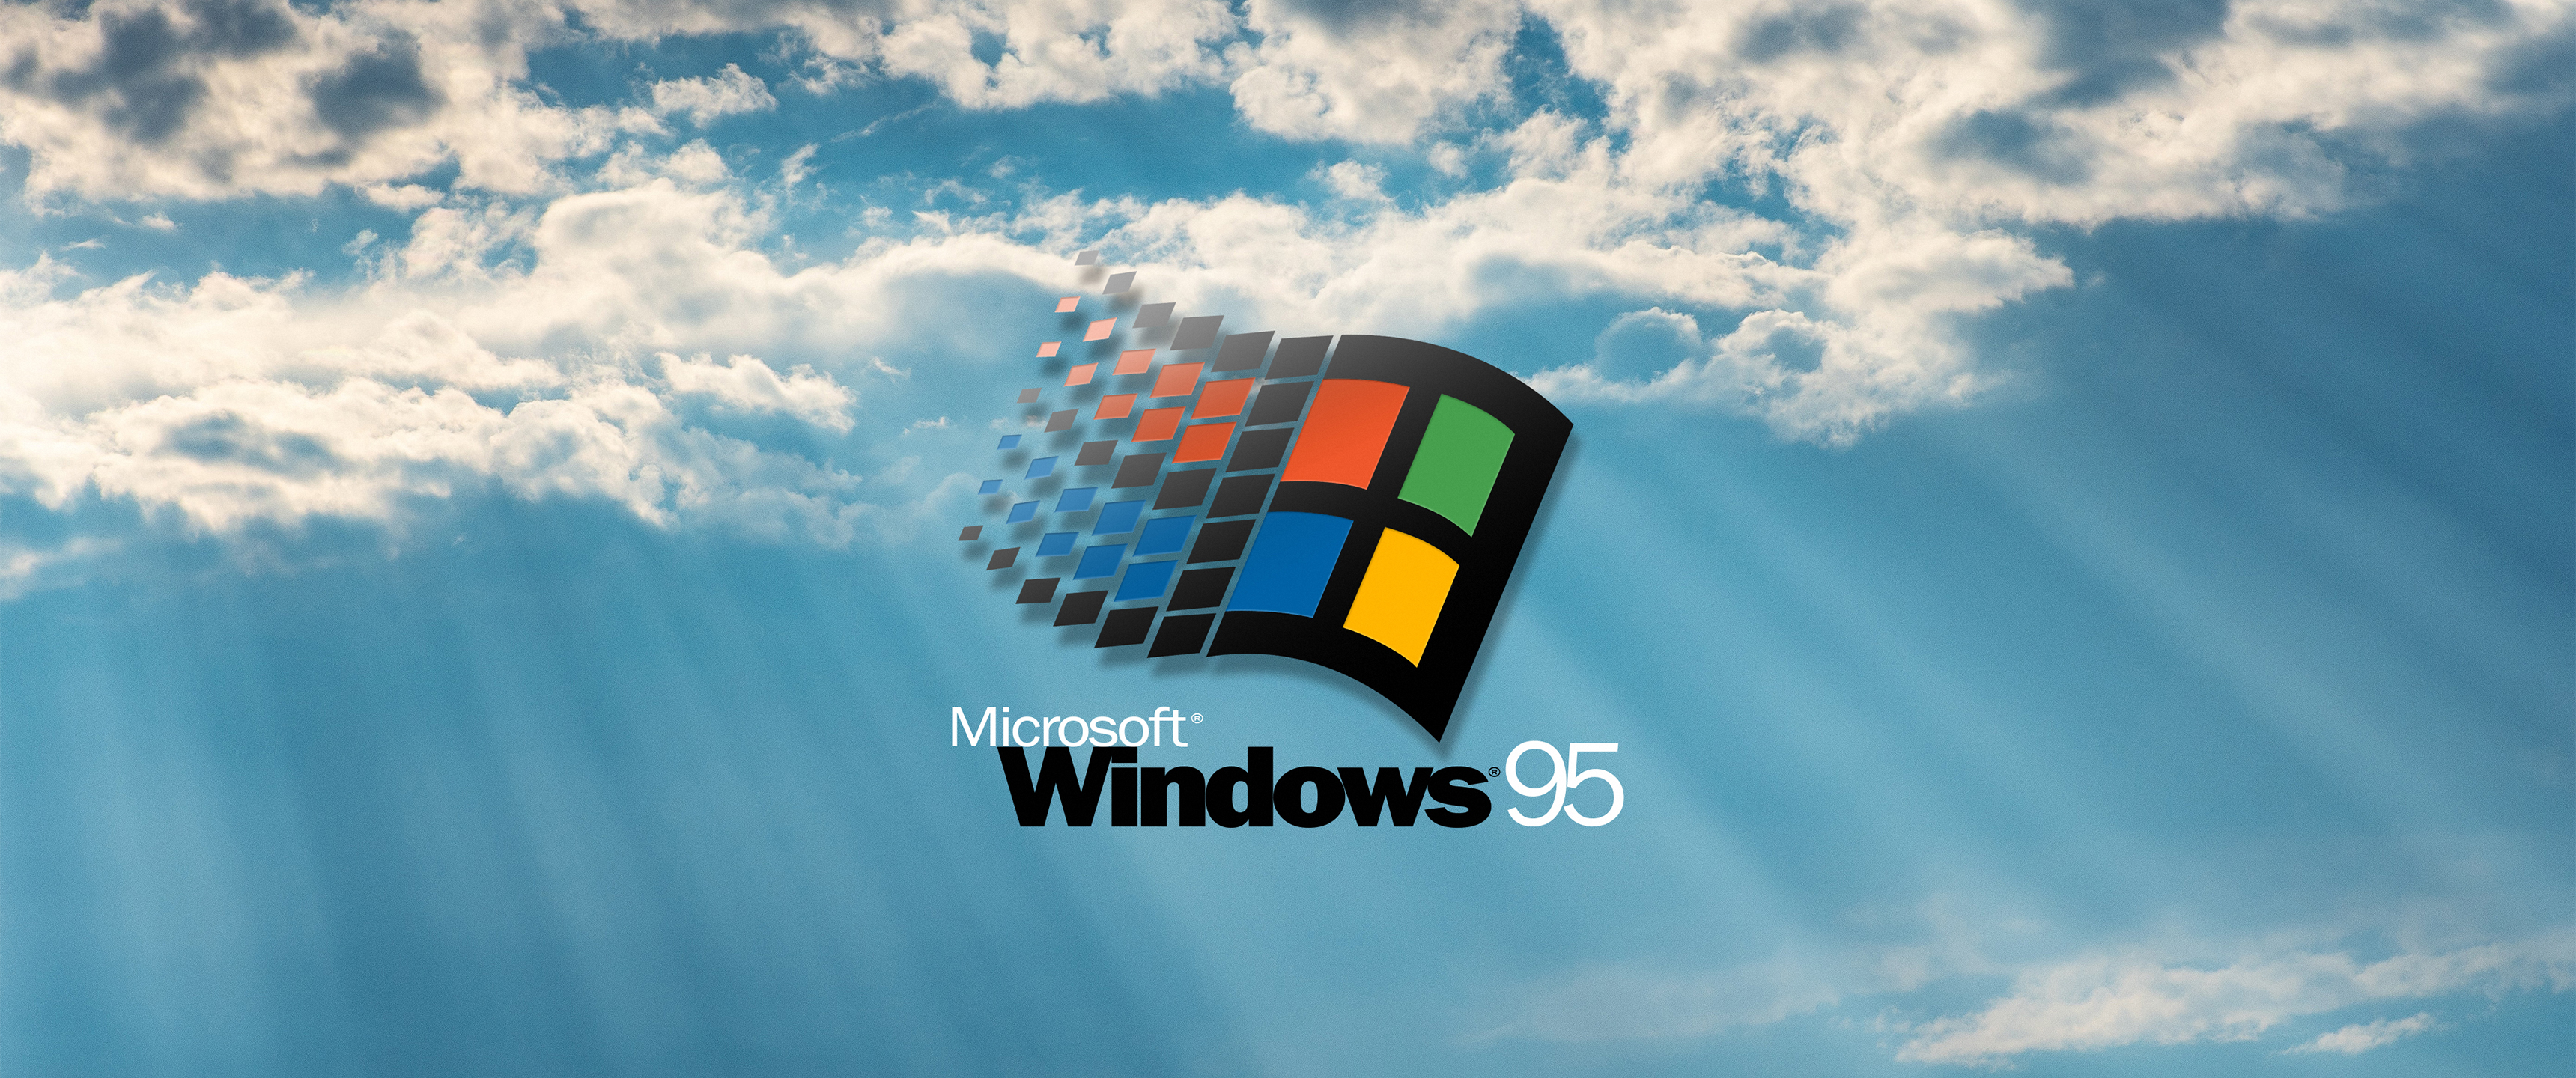 General 3440x1440 Windows 95 ultrawide operating system clouds